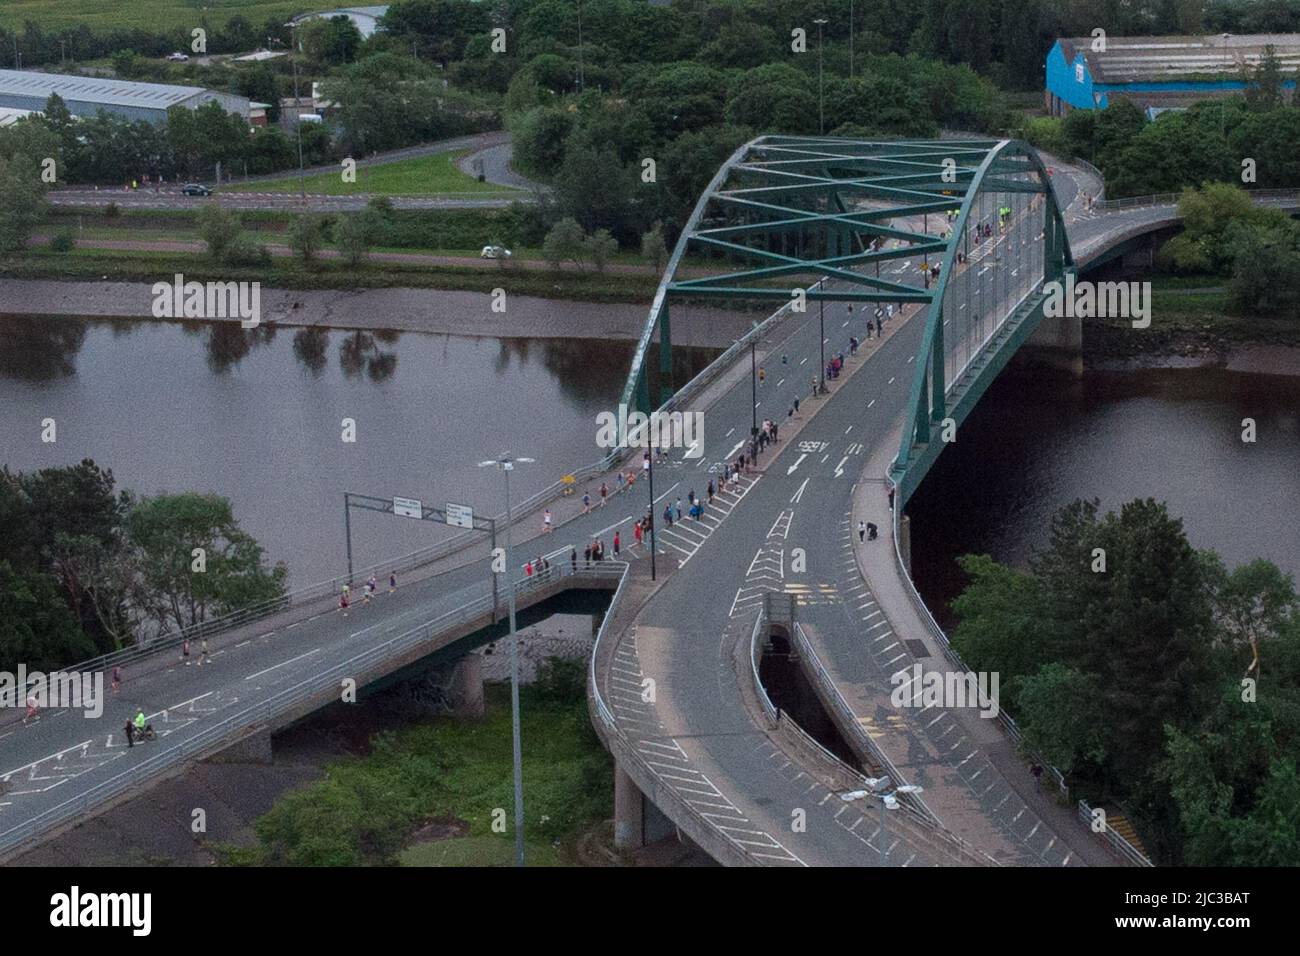 Blaydon, England, 9 June 2022. Aerial view of runners crossing the River Tyne on Scotswood Bridge during the annual Blaydon race from Newcastle to Blaydon. Credit: Colin Edwards/Alamy Live News. Stock Photo